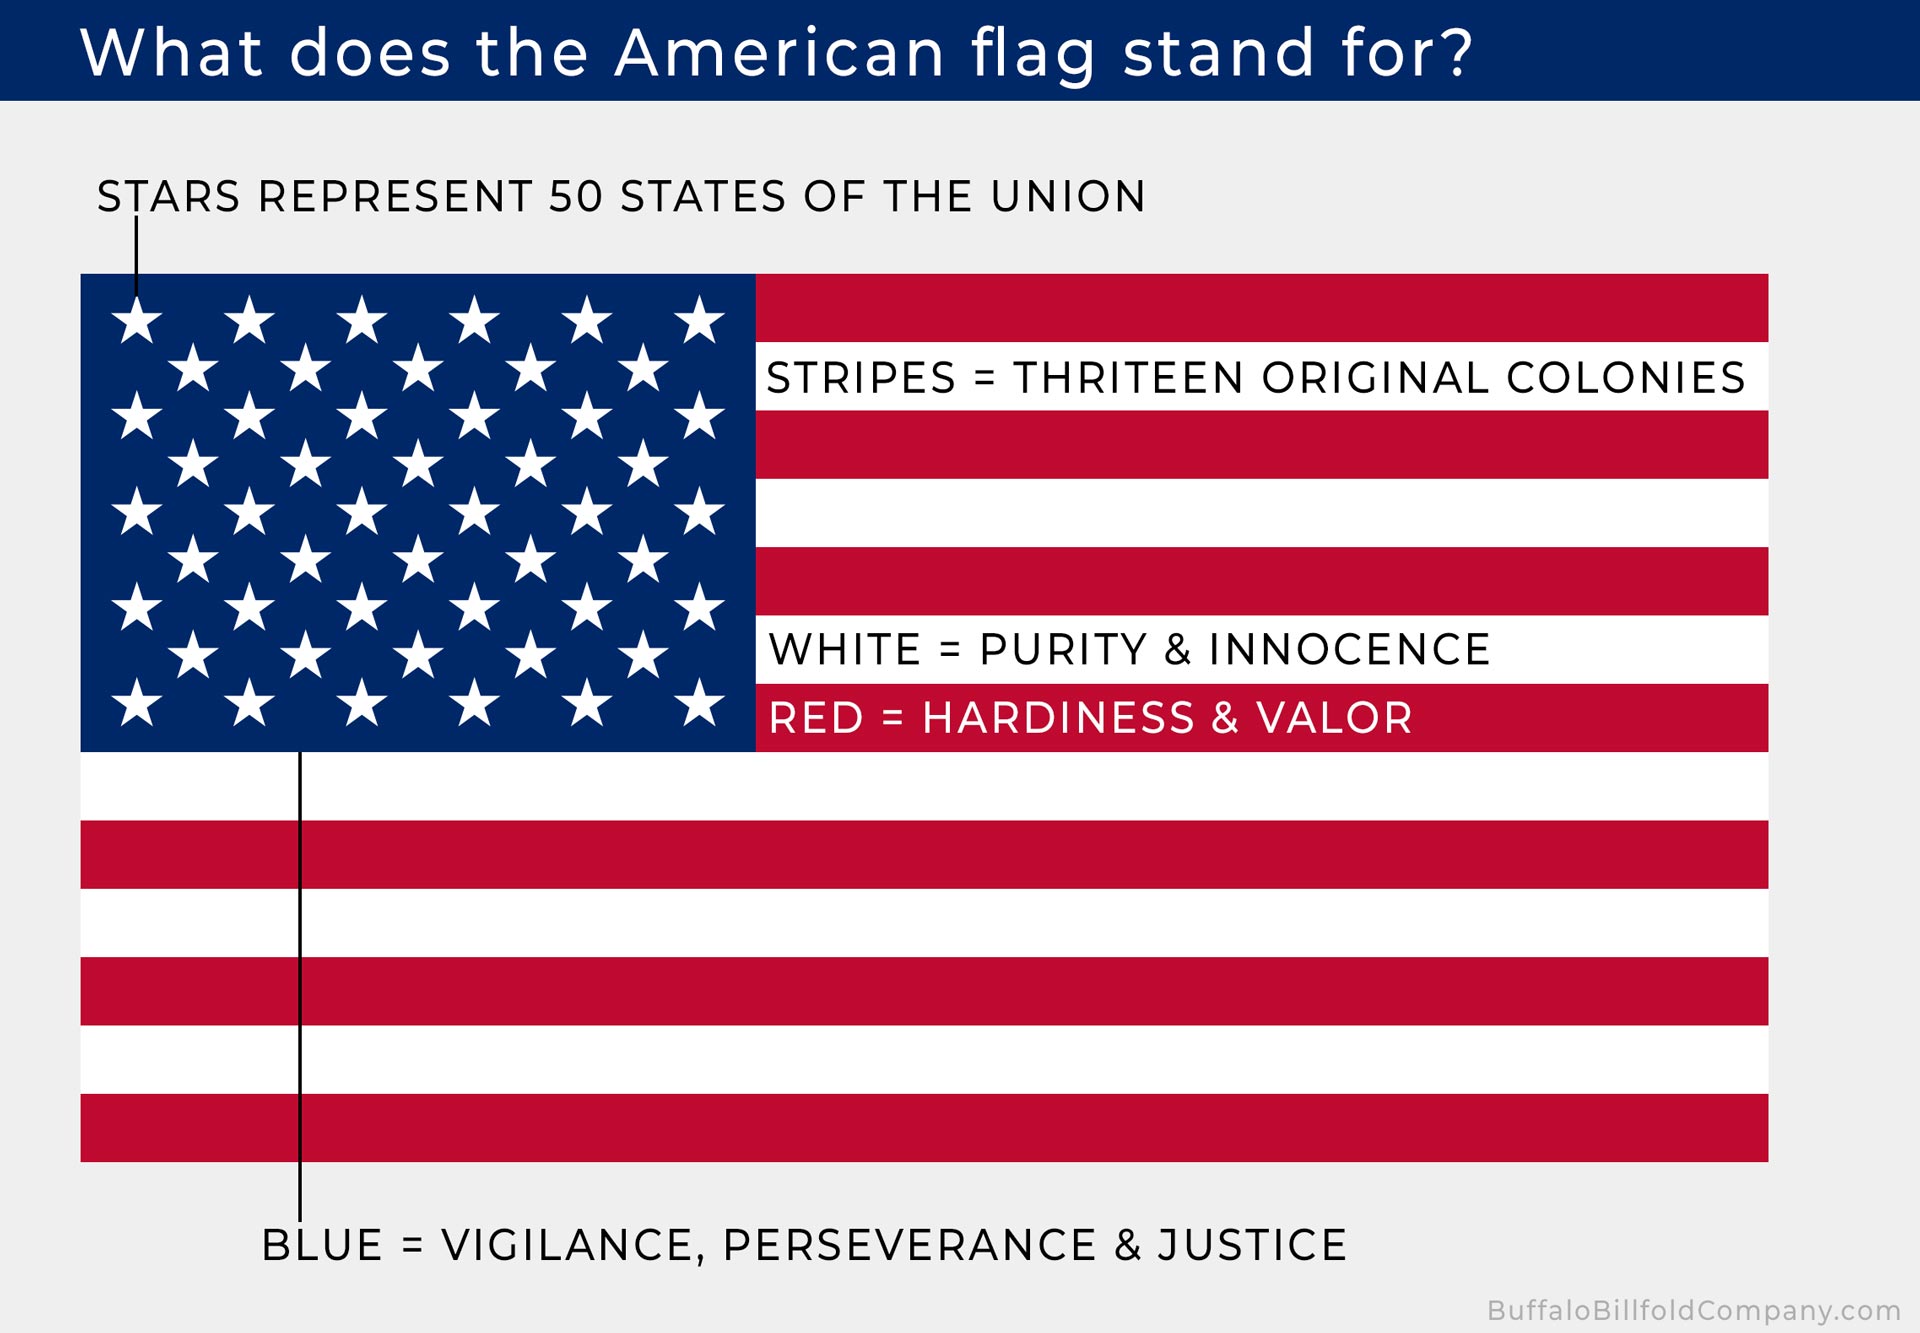 What does the American flag stand for?